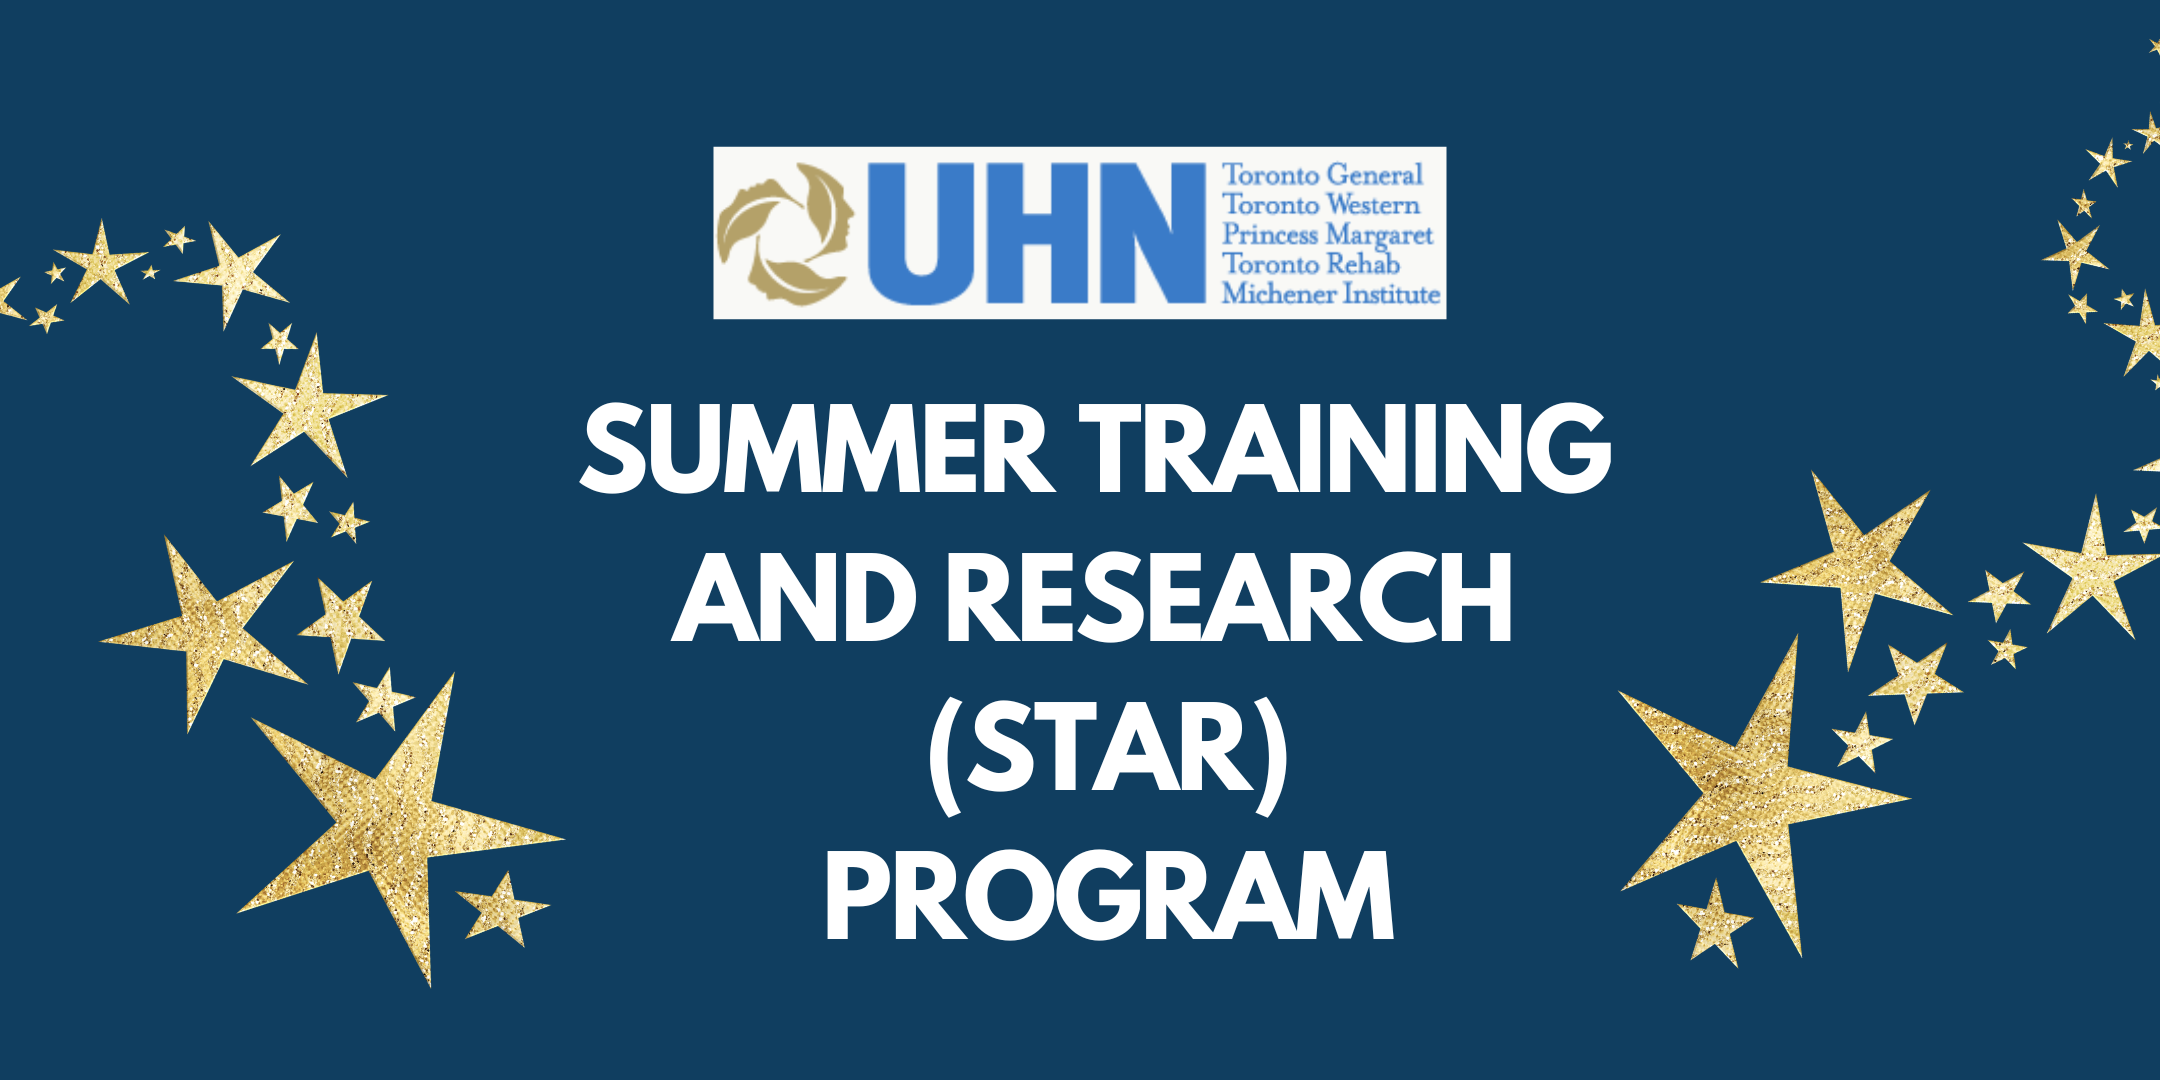 UHN Summer Training and Research (STAR) Program